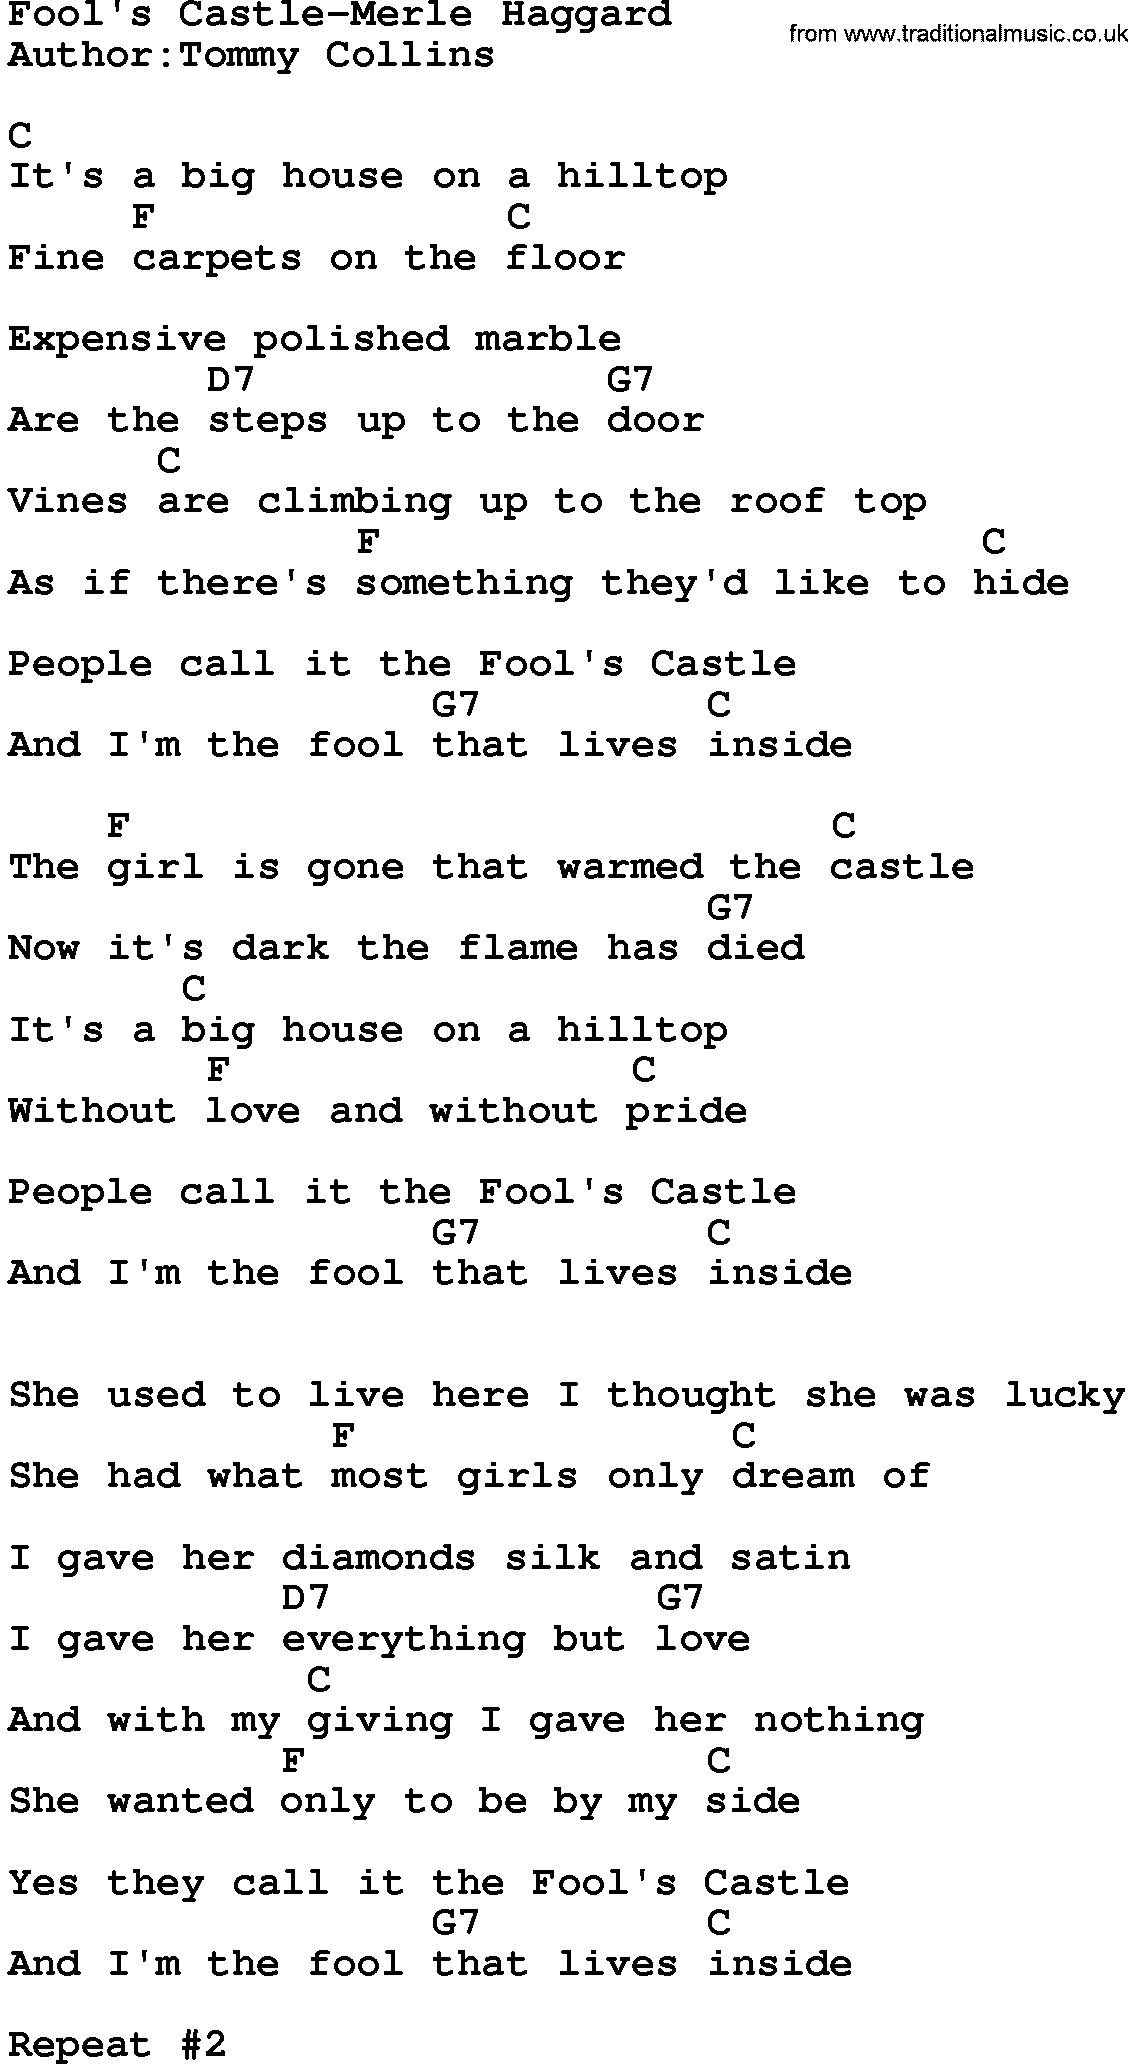 Country music song: Fool's Castle-Merle Haggard lyrics and chords